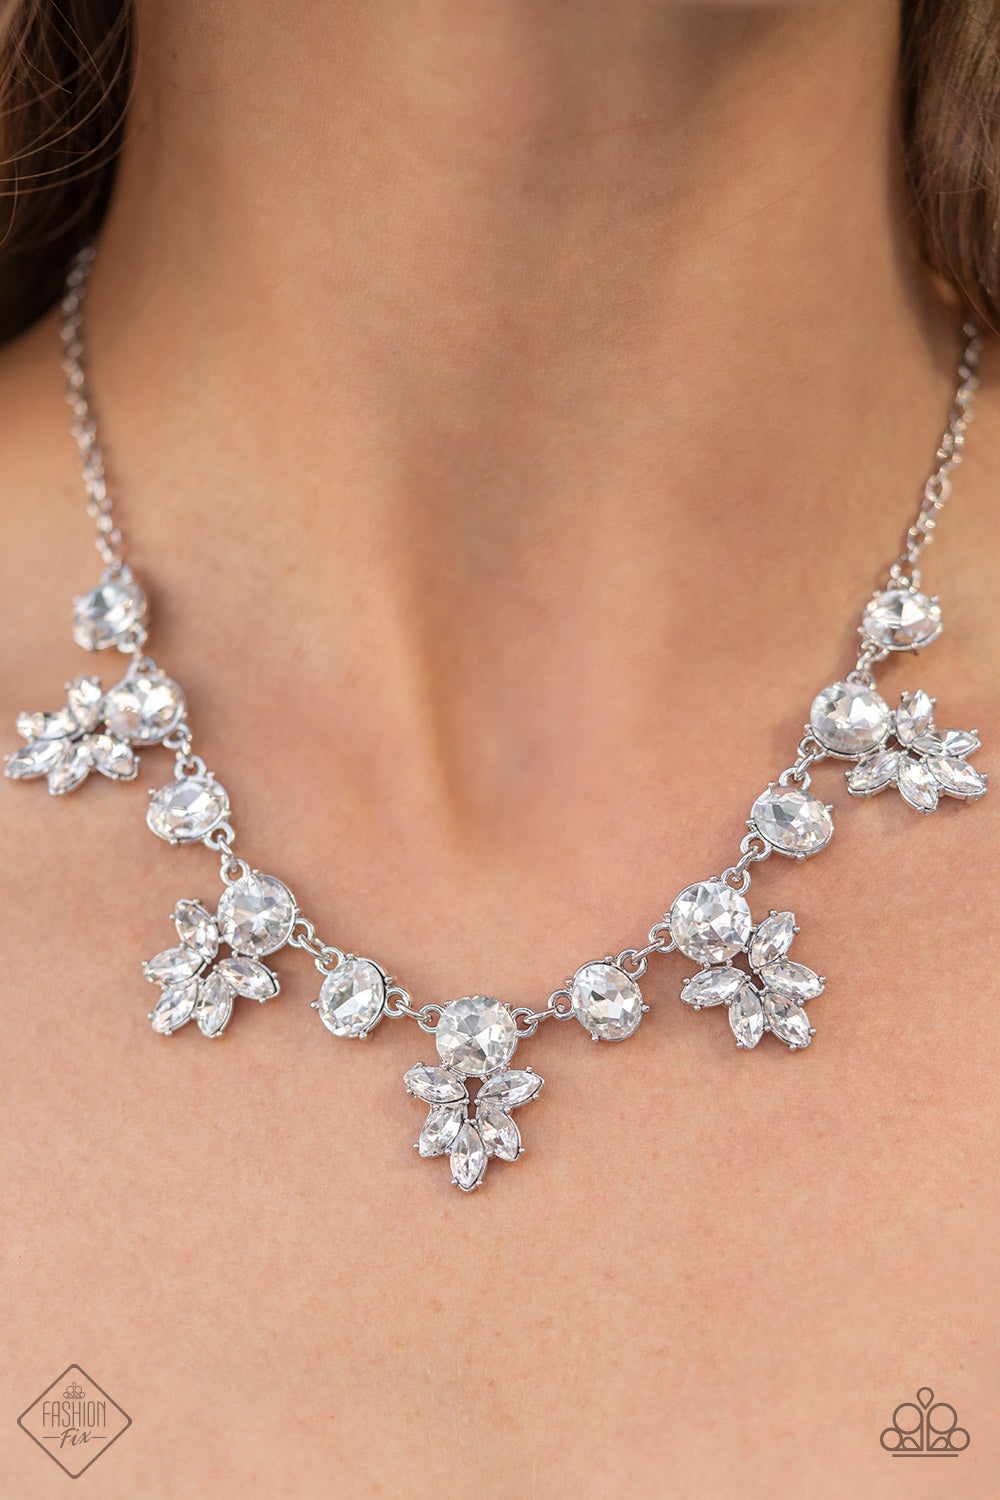 PAPARAZZI | Prismatic Proposal | May 2021 Fiercely 5th Avenue necklace